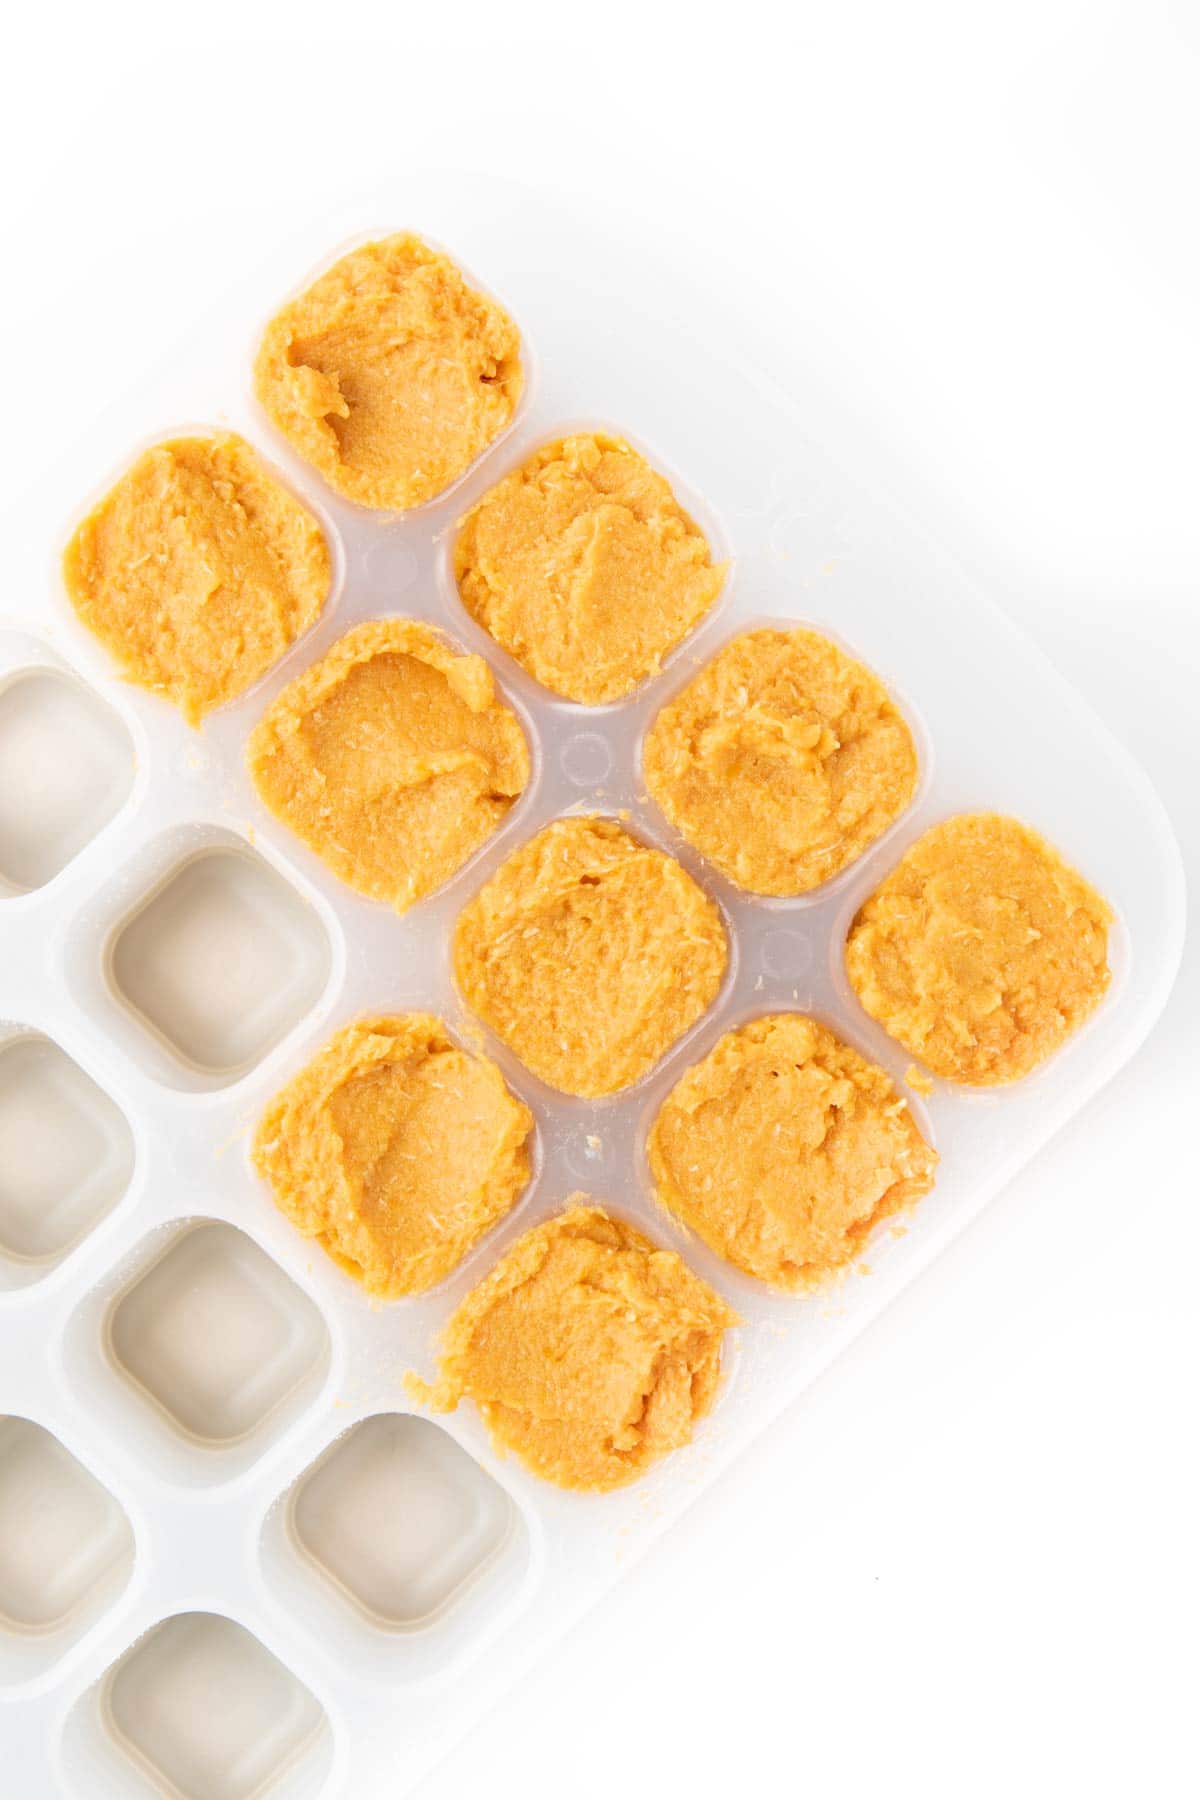 Ice Cube Tray Half Filled with Chicken Puree